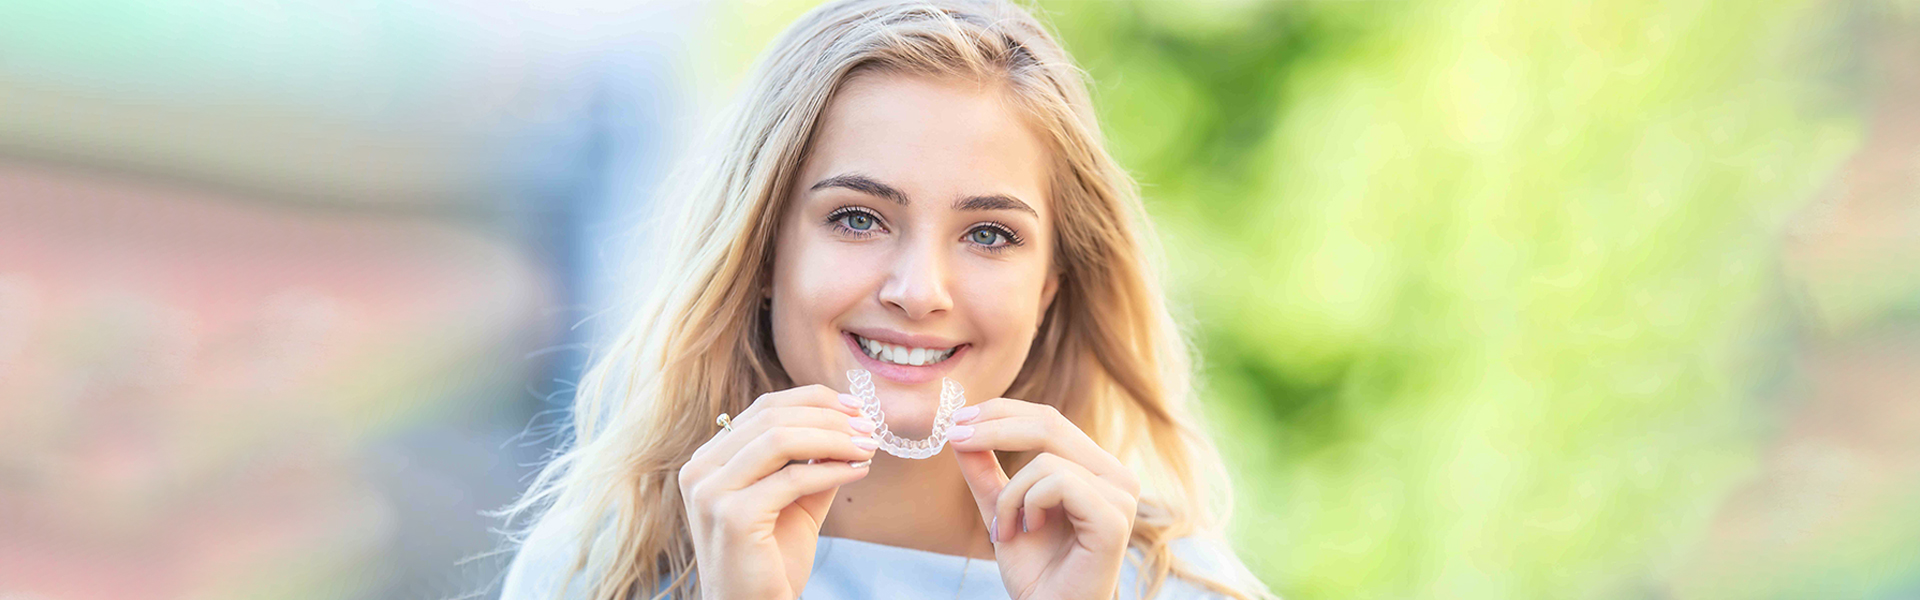 4 Tips To Make The Most Out Of Invisalign Aligners